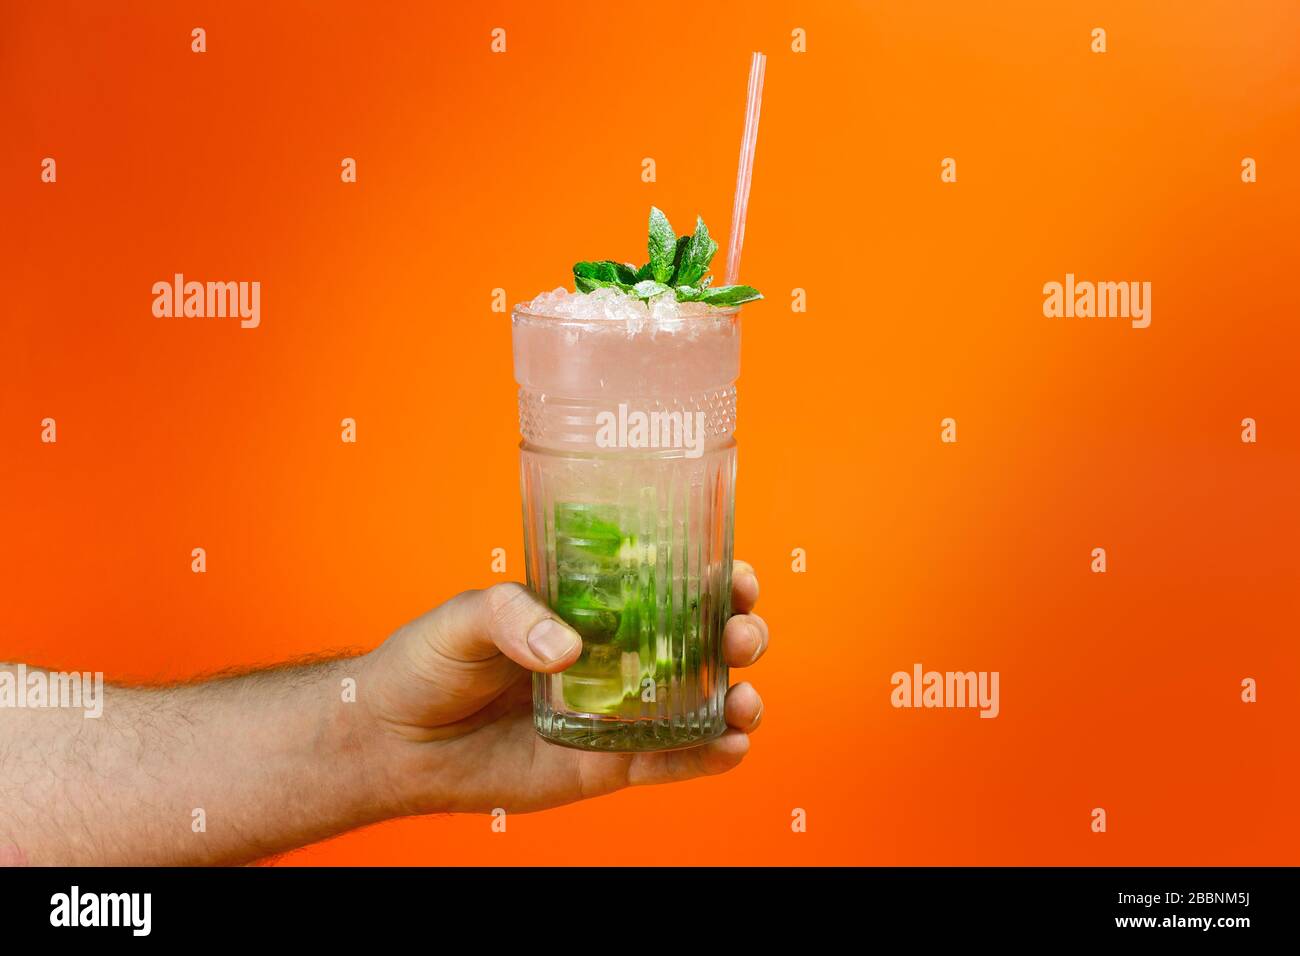 https://c8.alamy.com/comp/2BBNM5J/close-up-of-a-mans-hand-holding-a-glass-of-tropical-mojito-cocktail-on-orange-background-with-copy-space-summer-time-vacation-concept-2BBNM5J.jpg